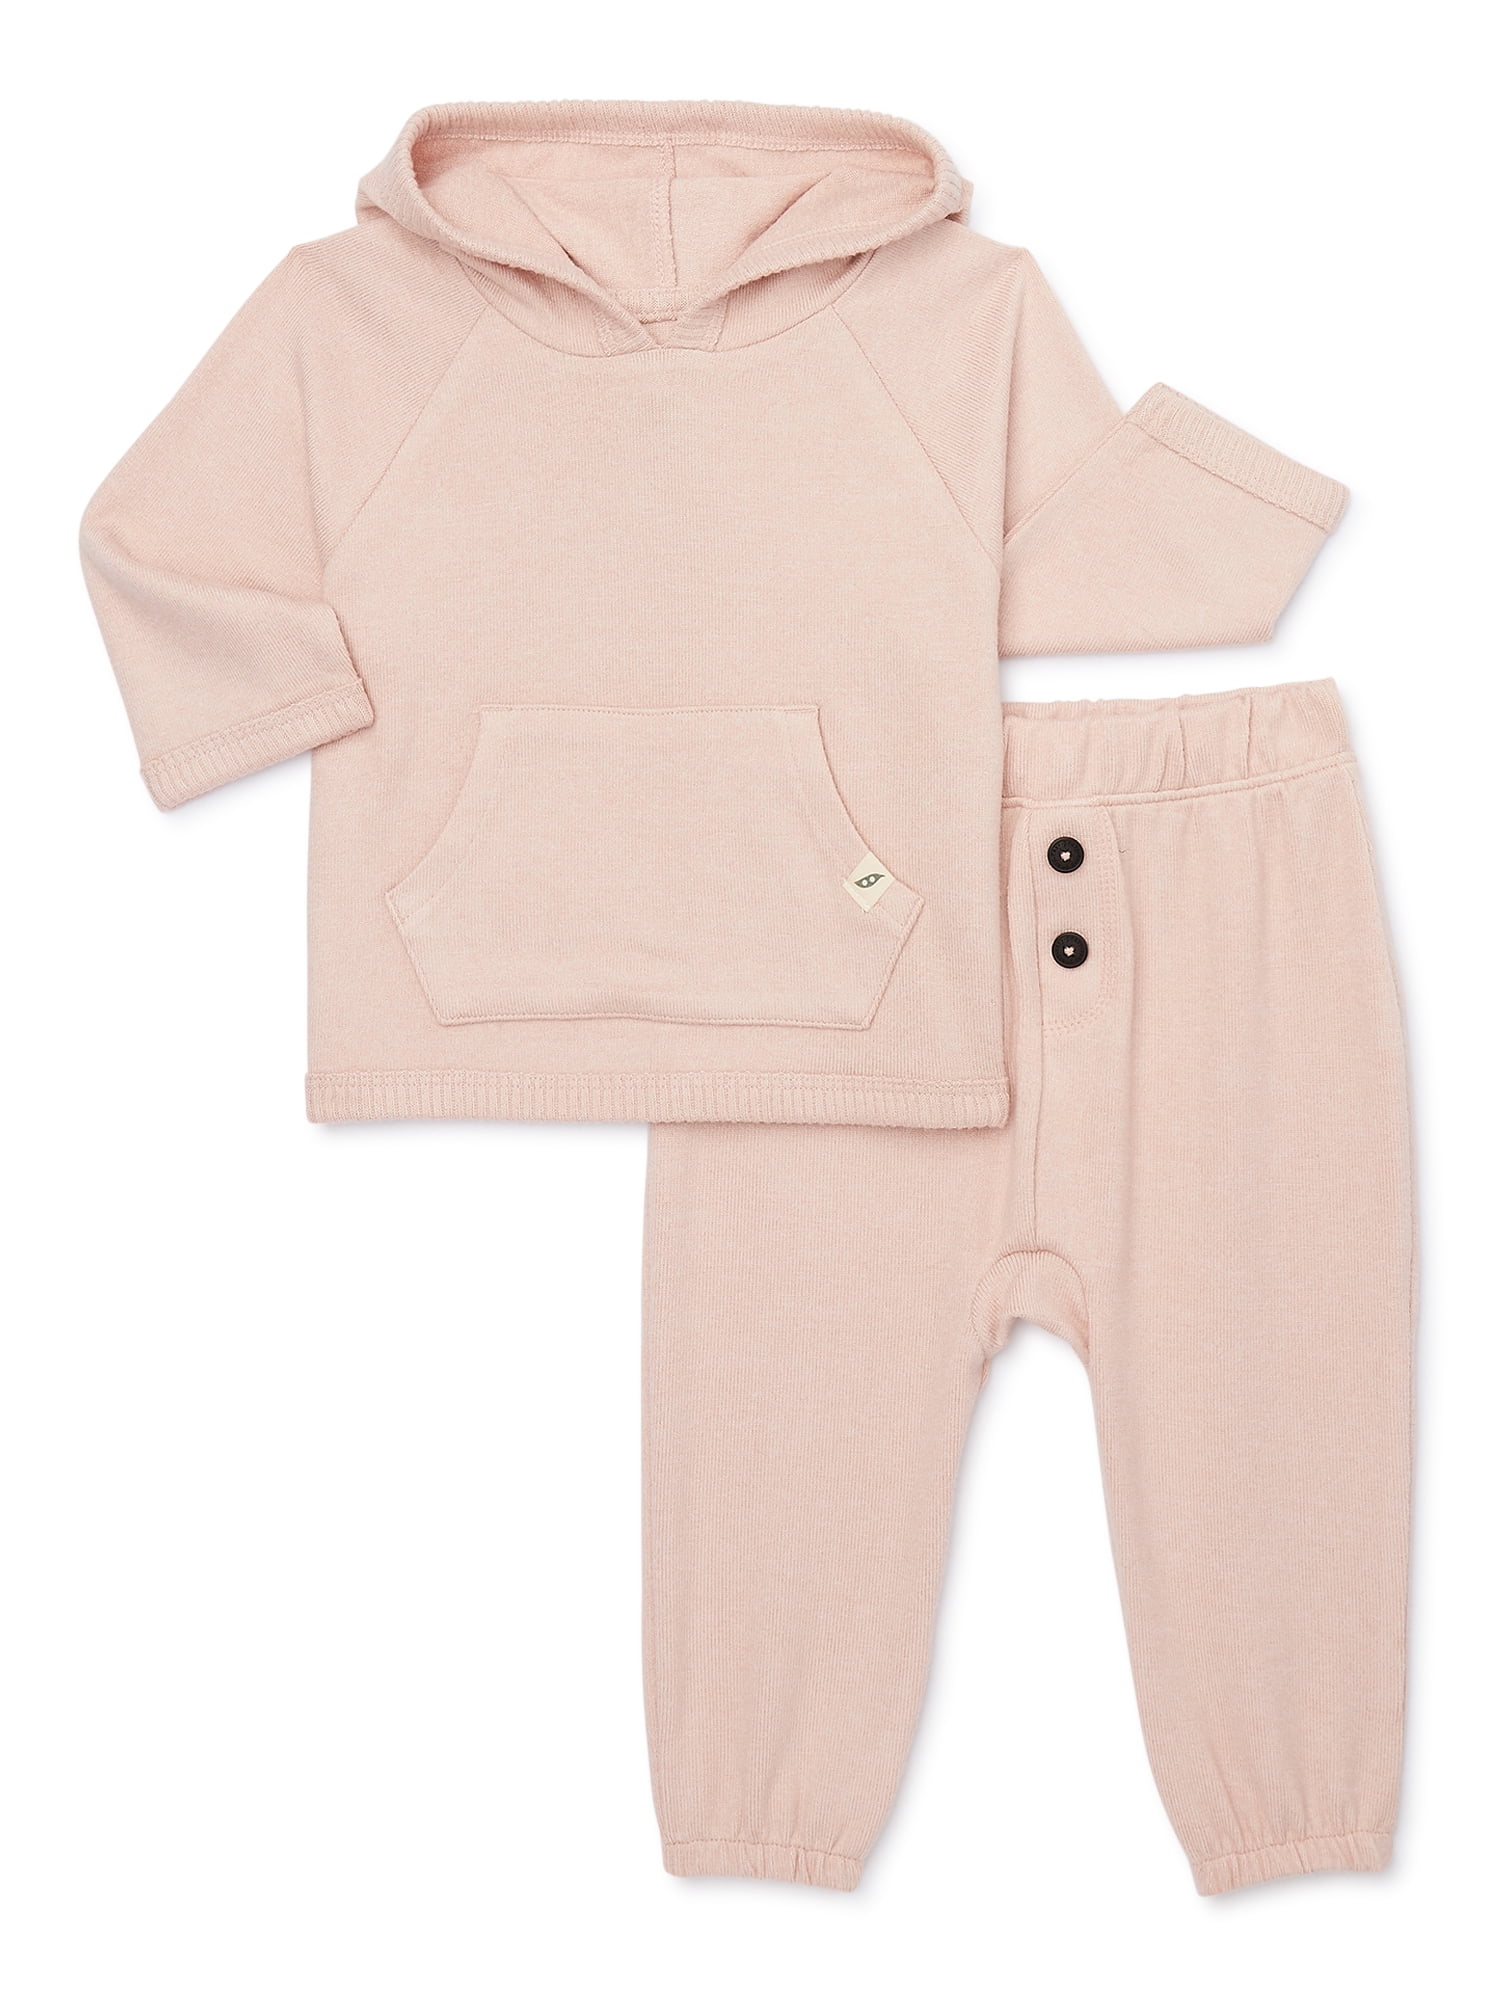 easy-peasy Baby Hoodie and Joggers Outfit Set, 2-Piece, Sizes 0M-24M ...